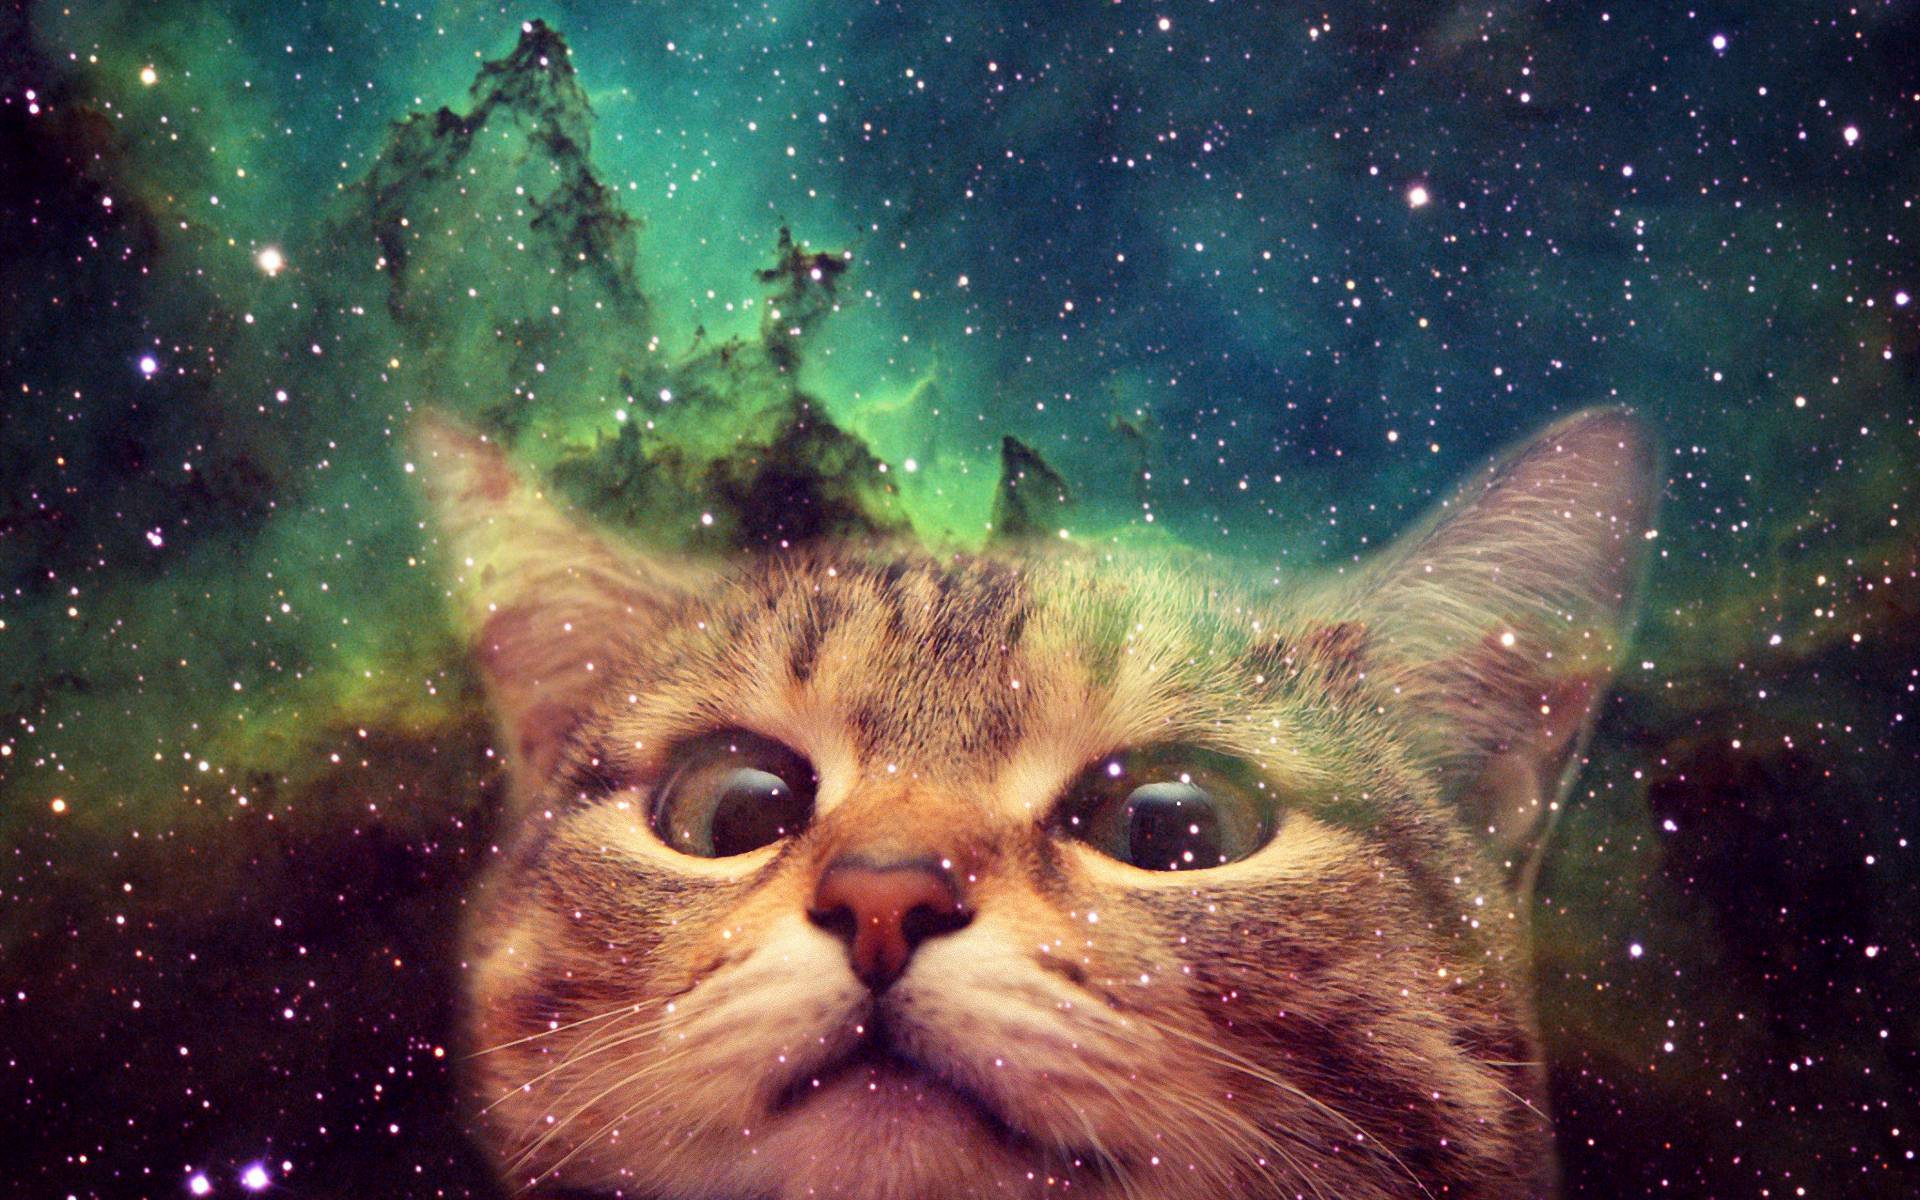  Awesome Cats In Space Wallpapers   Caveman Circus Caveman Circus 1920x1200